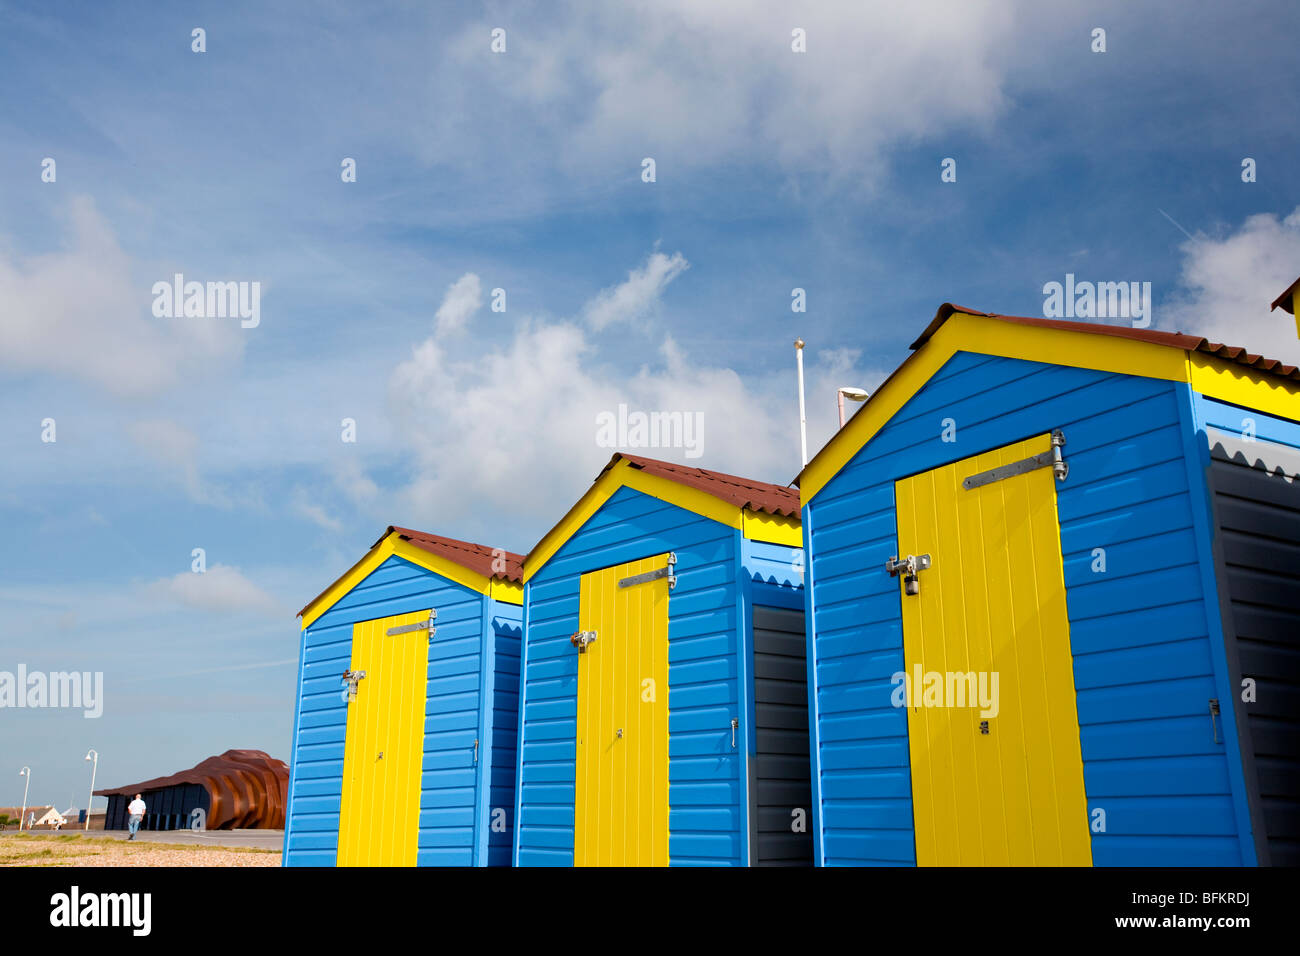 Blue yellow beach huts on the seafront of East Beach Cafe, Littlehampton, West Sussex, England, Britain Stock Photo